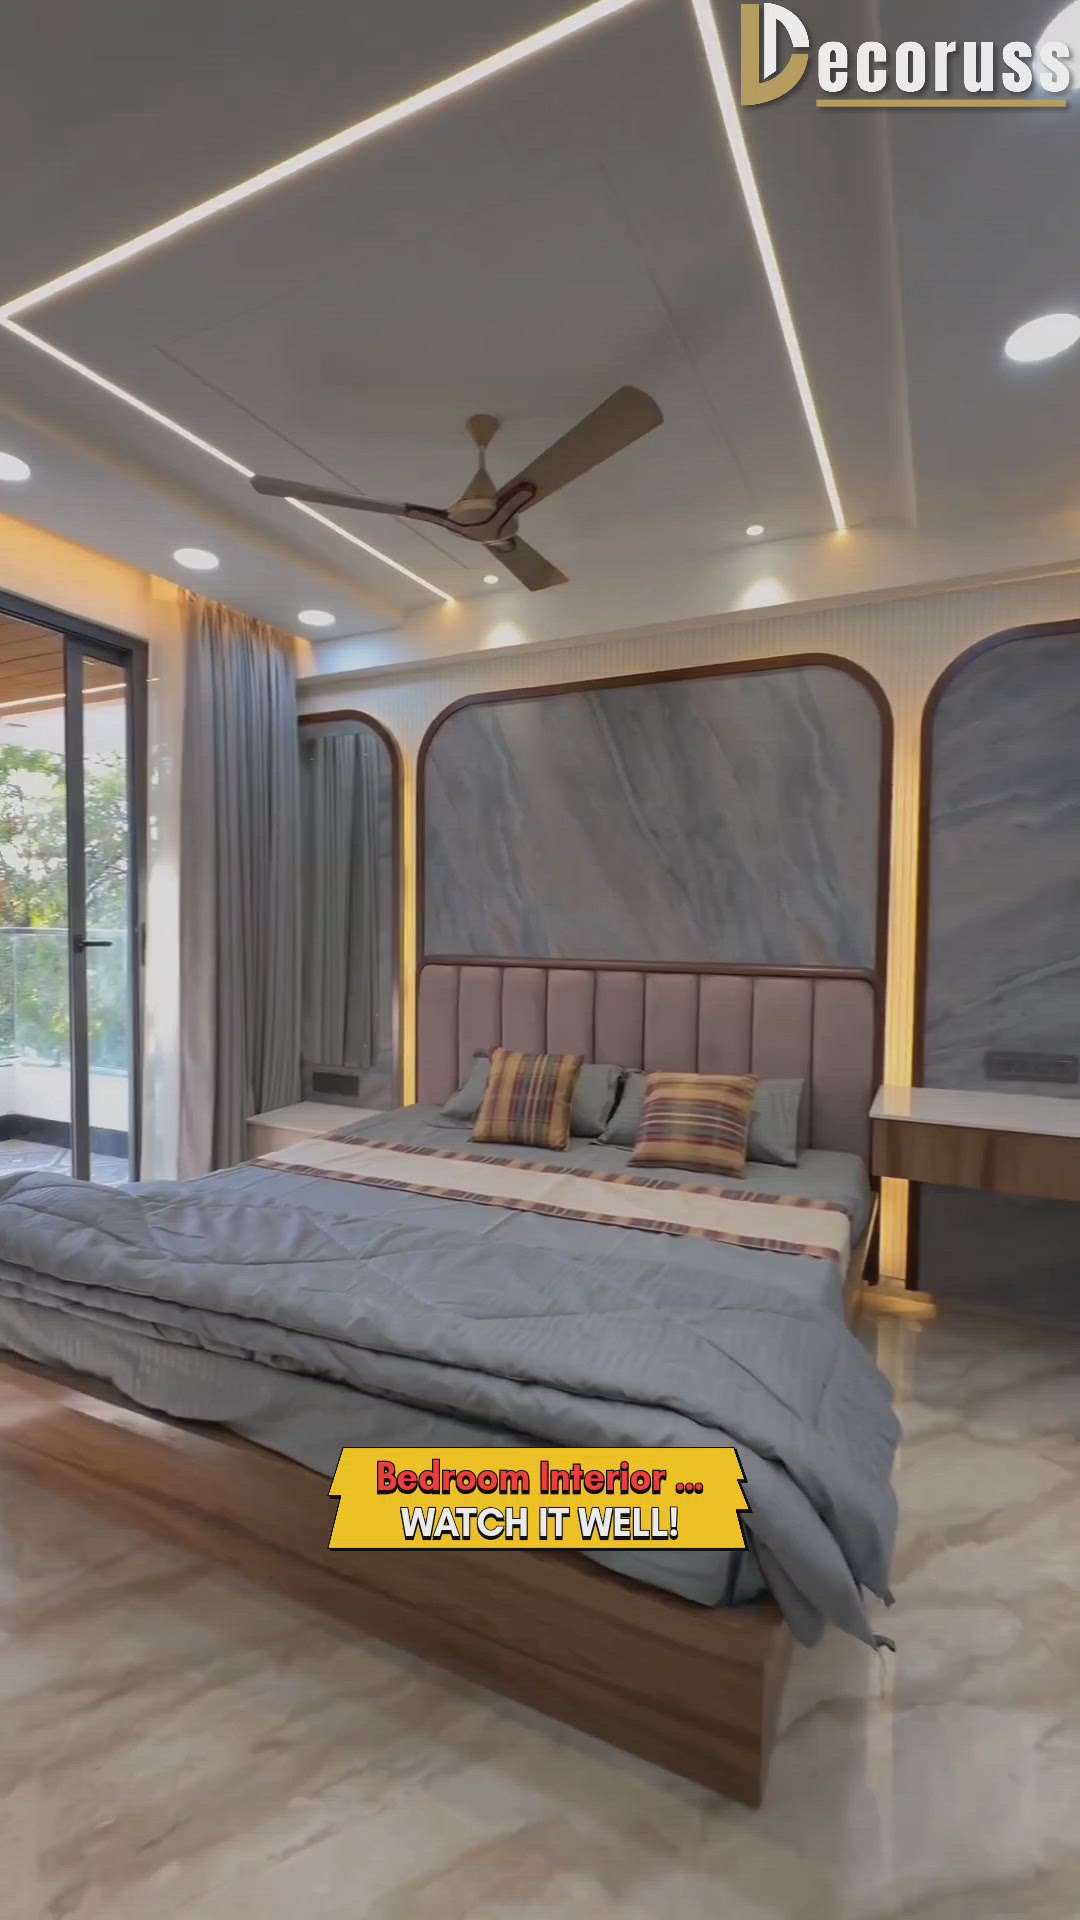 Bedroom interior design shorts 😍 | Bedroom Interior Decor Shots 🔥| Modern bedroom interior designing
Please watch out this video -  https://youtube.com/shorts/nqOrVjo-jUs?feature=share
#decoruss #interiordesigner #bedroominteriordesign #youtubeshorts  #interiordecorator #bedroominteriors #bedroominteriordesignerinlucknow
#interiordesigncompany  #lucknowinteriordesigner #bestinteriordesignerinlucknow #interiordesigncervices #homeinteriordesigncompany #homeinteriordecorcompany #lucknow #lucknowcity  

Best interior designer house in Lucknow.
Best Architect in Lucknow.
Lucknow interior shop.
home interior design in lucknow
3bhk interior design 
Bedroom interior design
2bhk flat interior design
Modular kitchen in Lucknow Price.
Modular kitchen designs in Lucknow.
Modular kitchen in Lucknow.
Top ten interior designers in Lucknow.
Architect and interior designer in Lucknow.
3d Interior Designer in Lucknow.
Interior designers in Lucknow contact number.